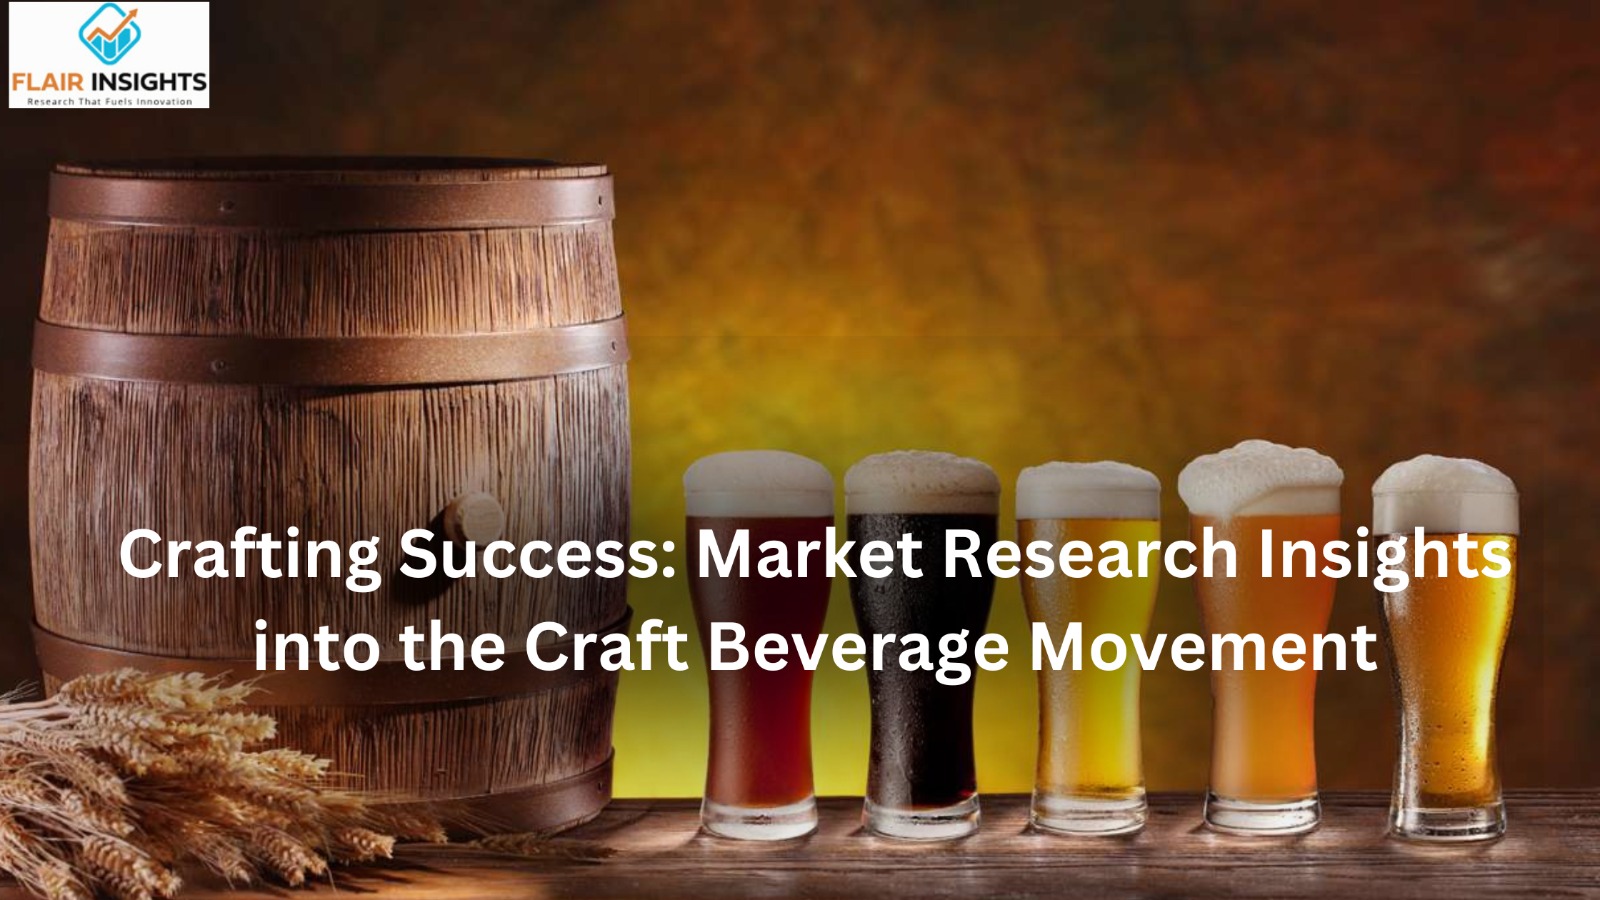 Crafting Success: Market Research Insights into the Craft Beverage Movement